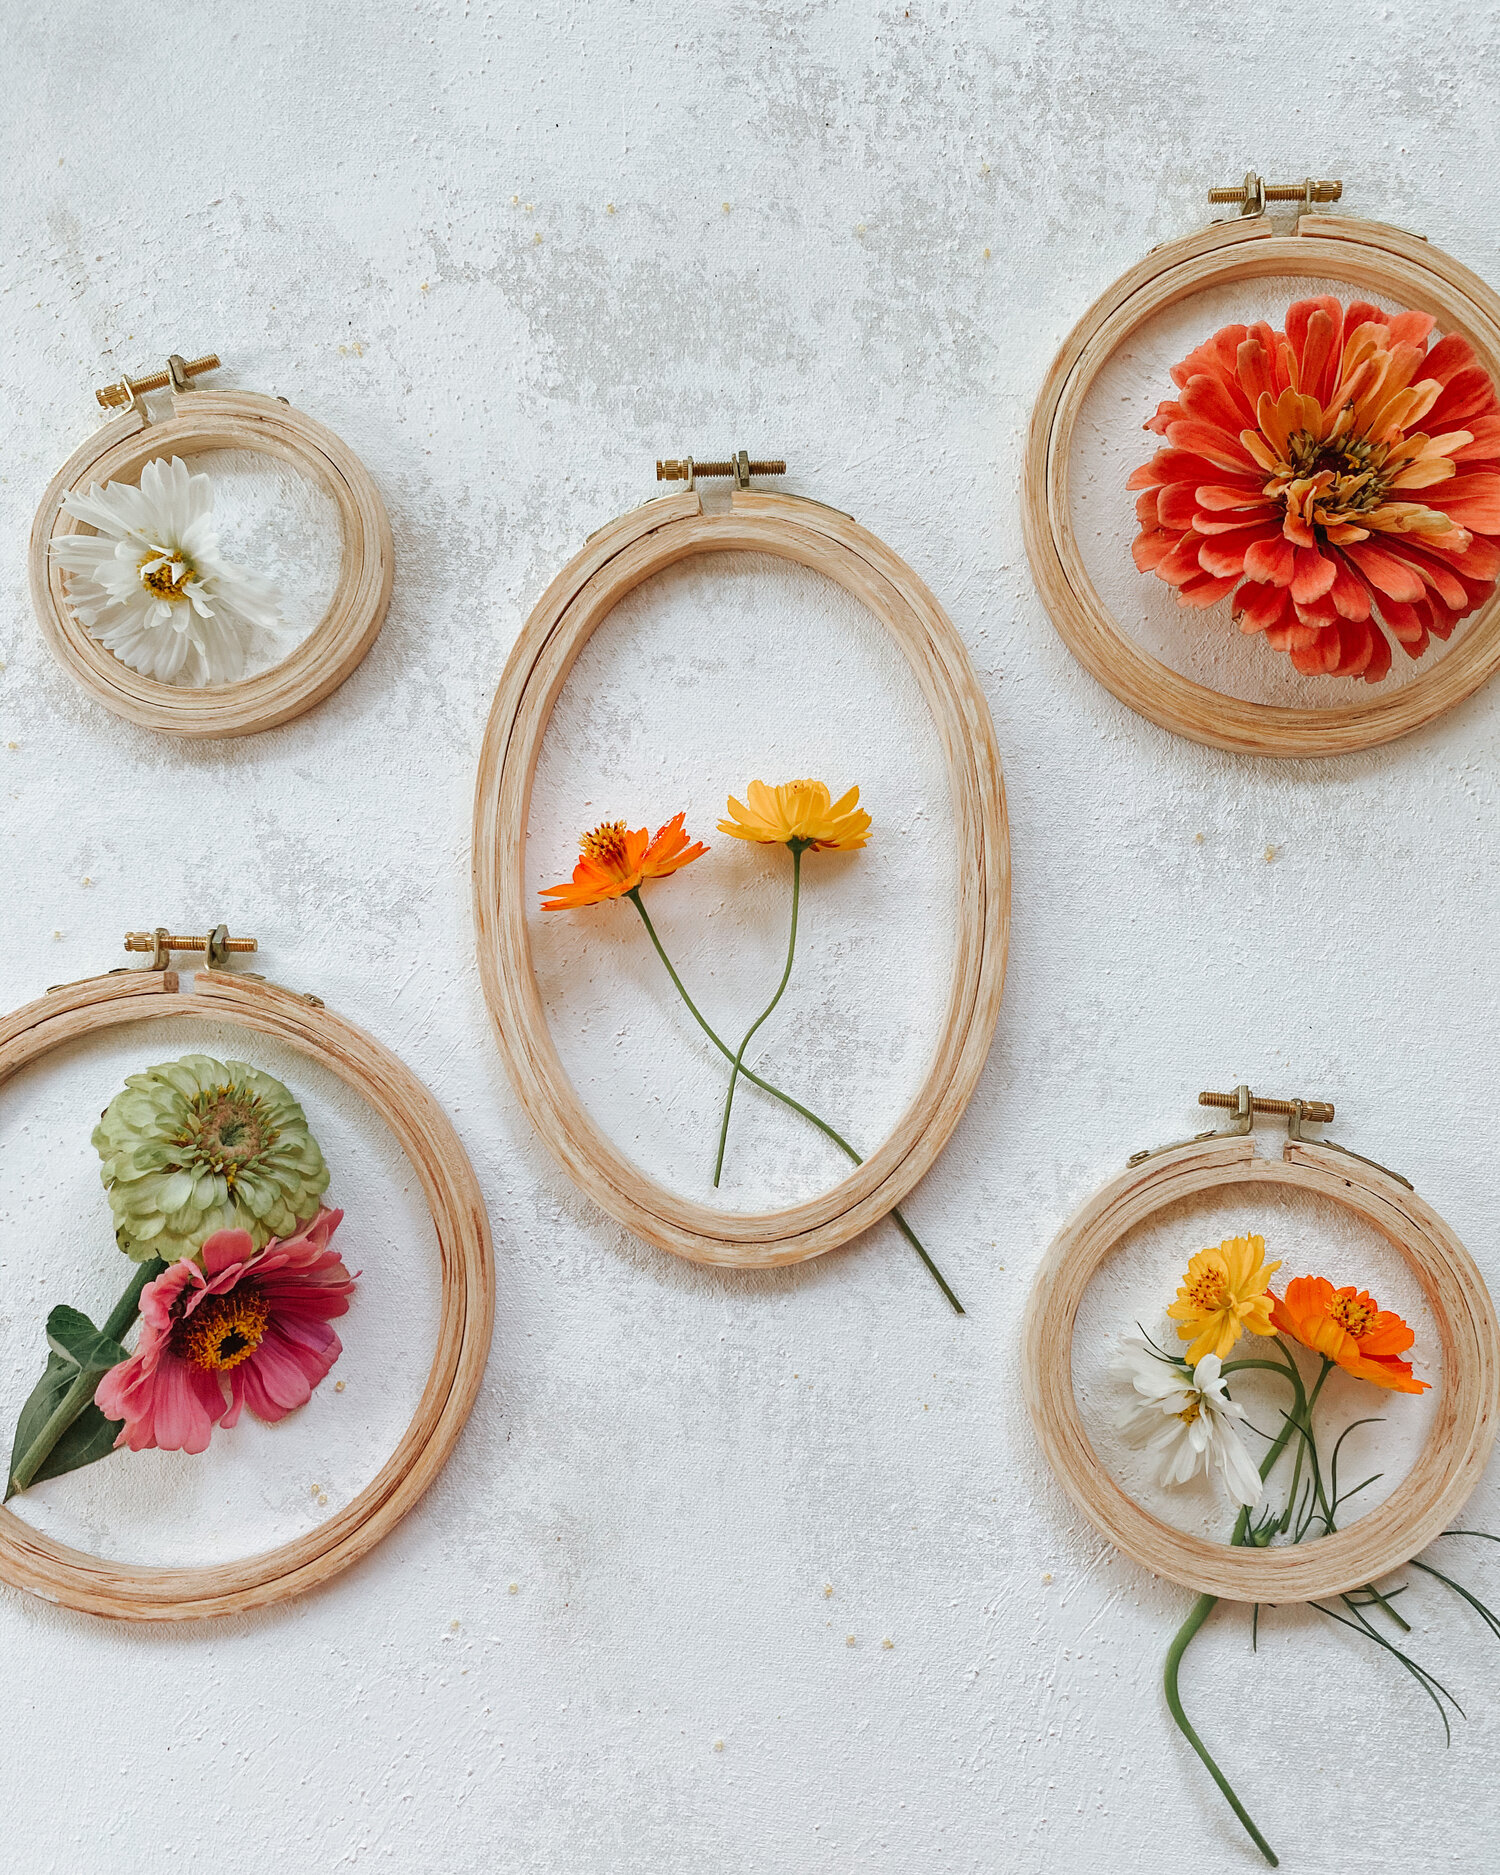 Wooden Embroidery Hoops set of 6 — 10” 8.5” 7.25” 6.25” 4.75” and 3.7”